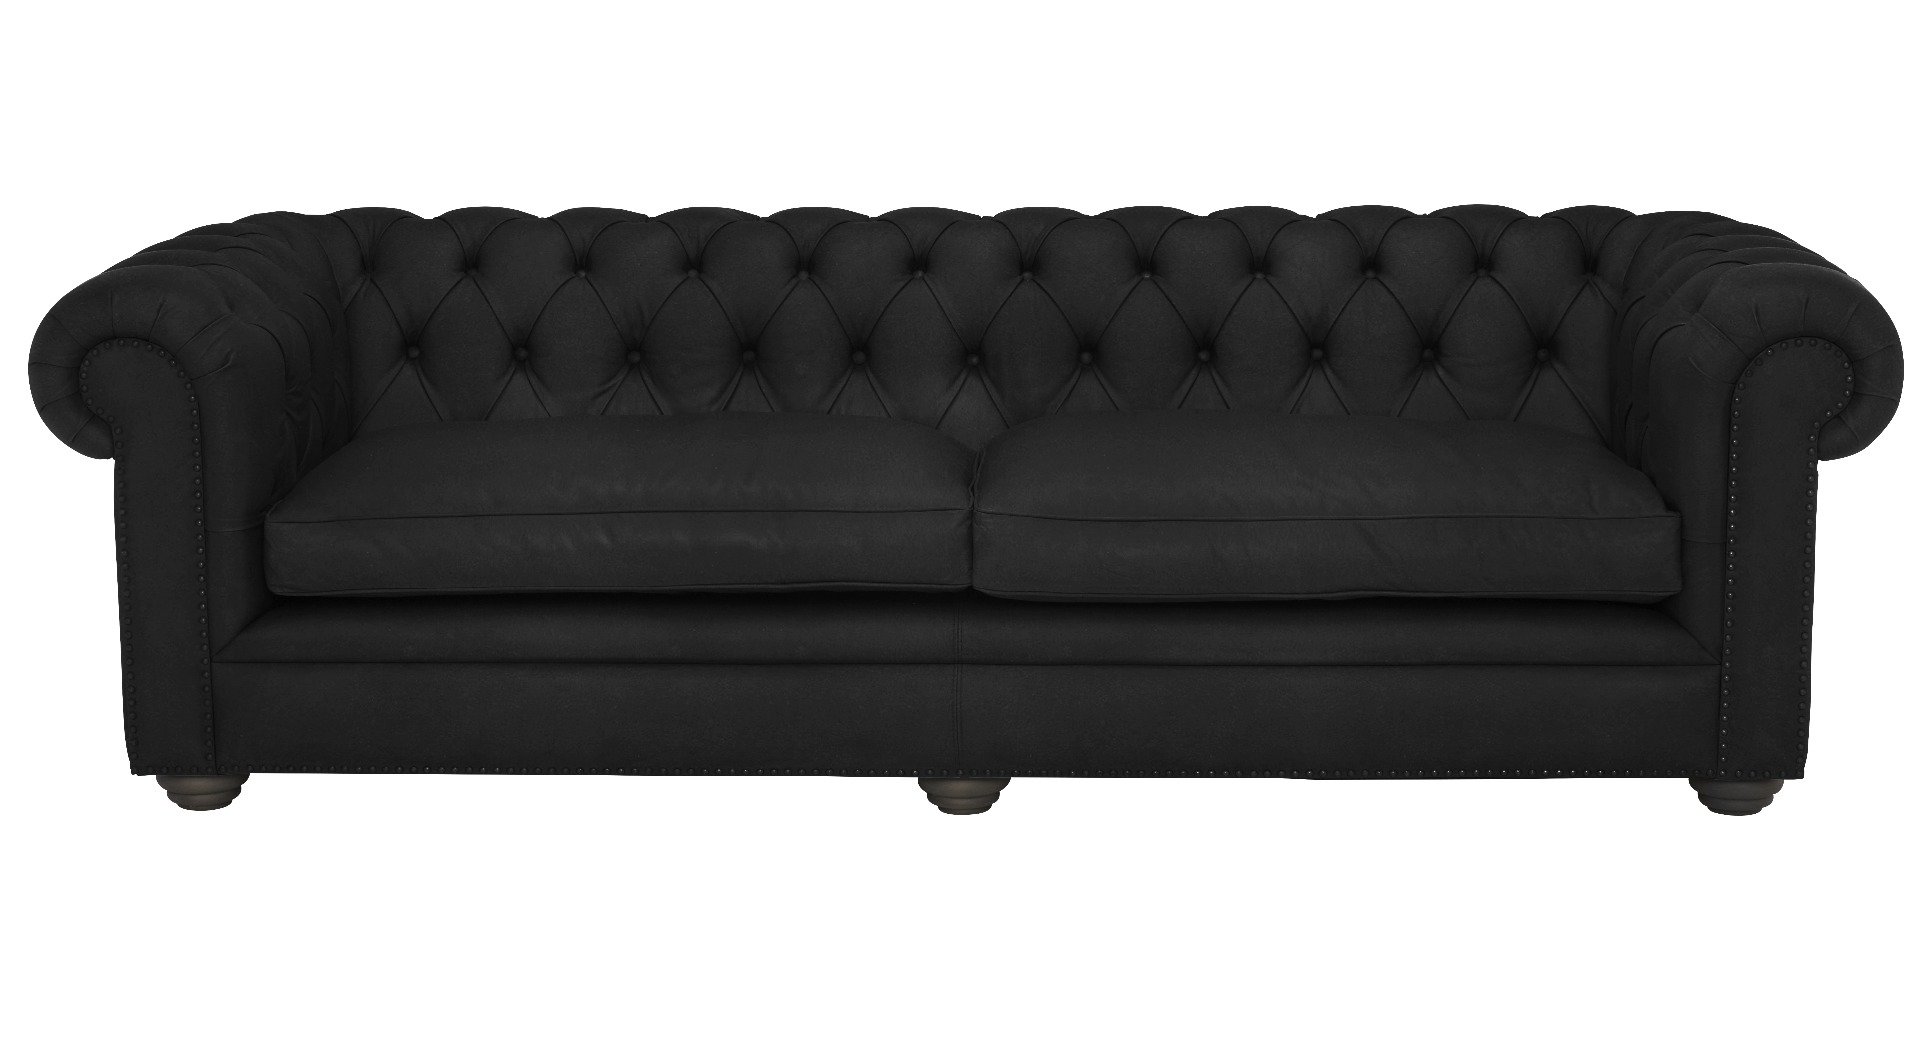 Pure Furniture Winslow Chesterfield Sofa 240cm With Wooden Legs, Black Leather | Barker & Stonehouse